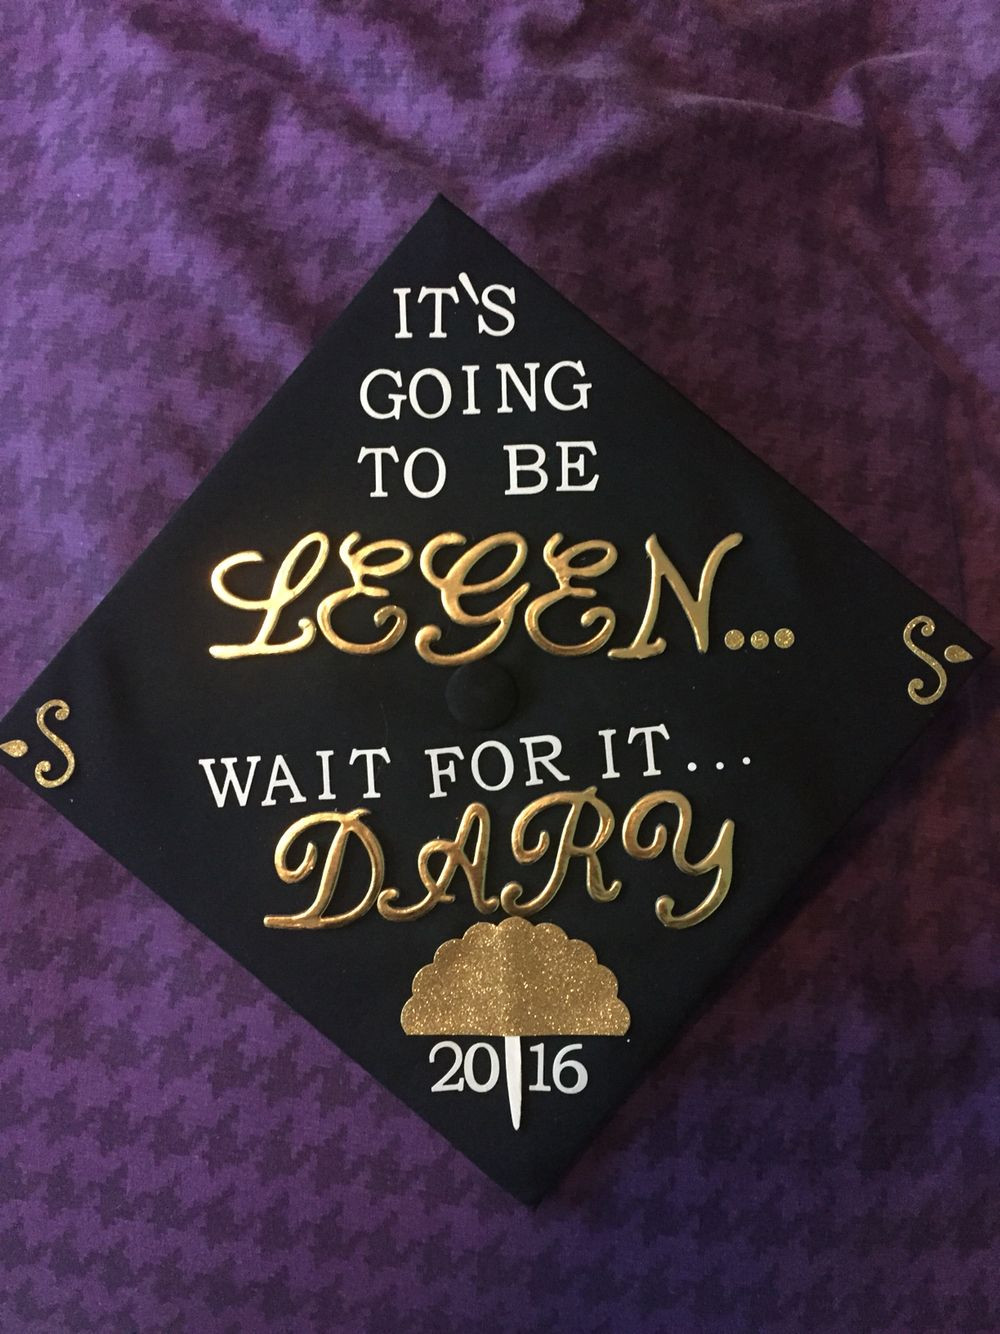 Graduation Cap Quotes
 My graduation cap based on the quote from How I Met Your